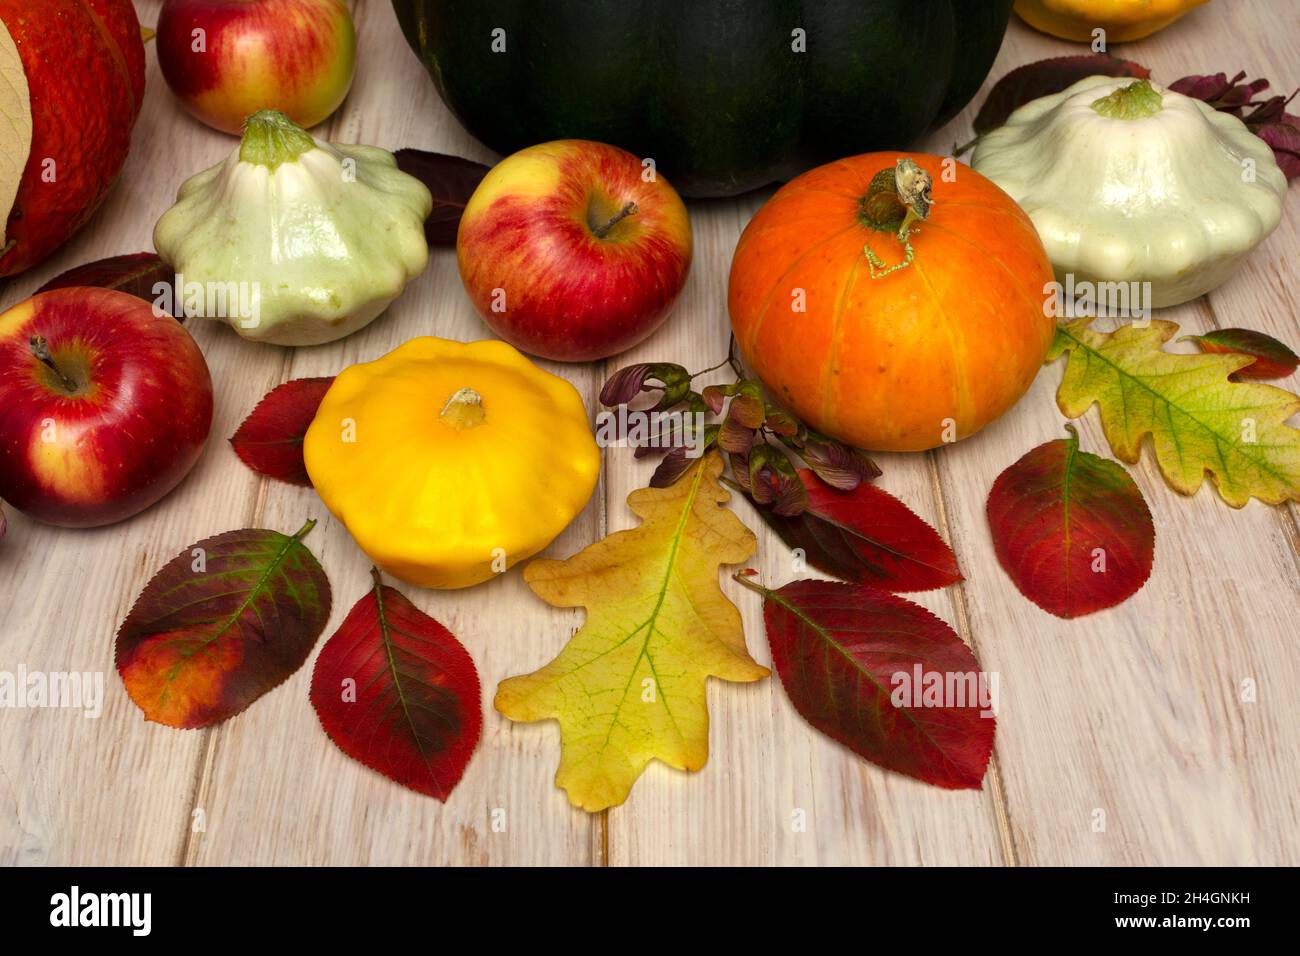 Autumn brunch table in the backyard with pumpkin and yellow decor Stock  Photo - Alamy